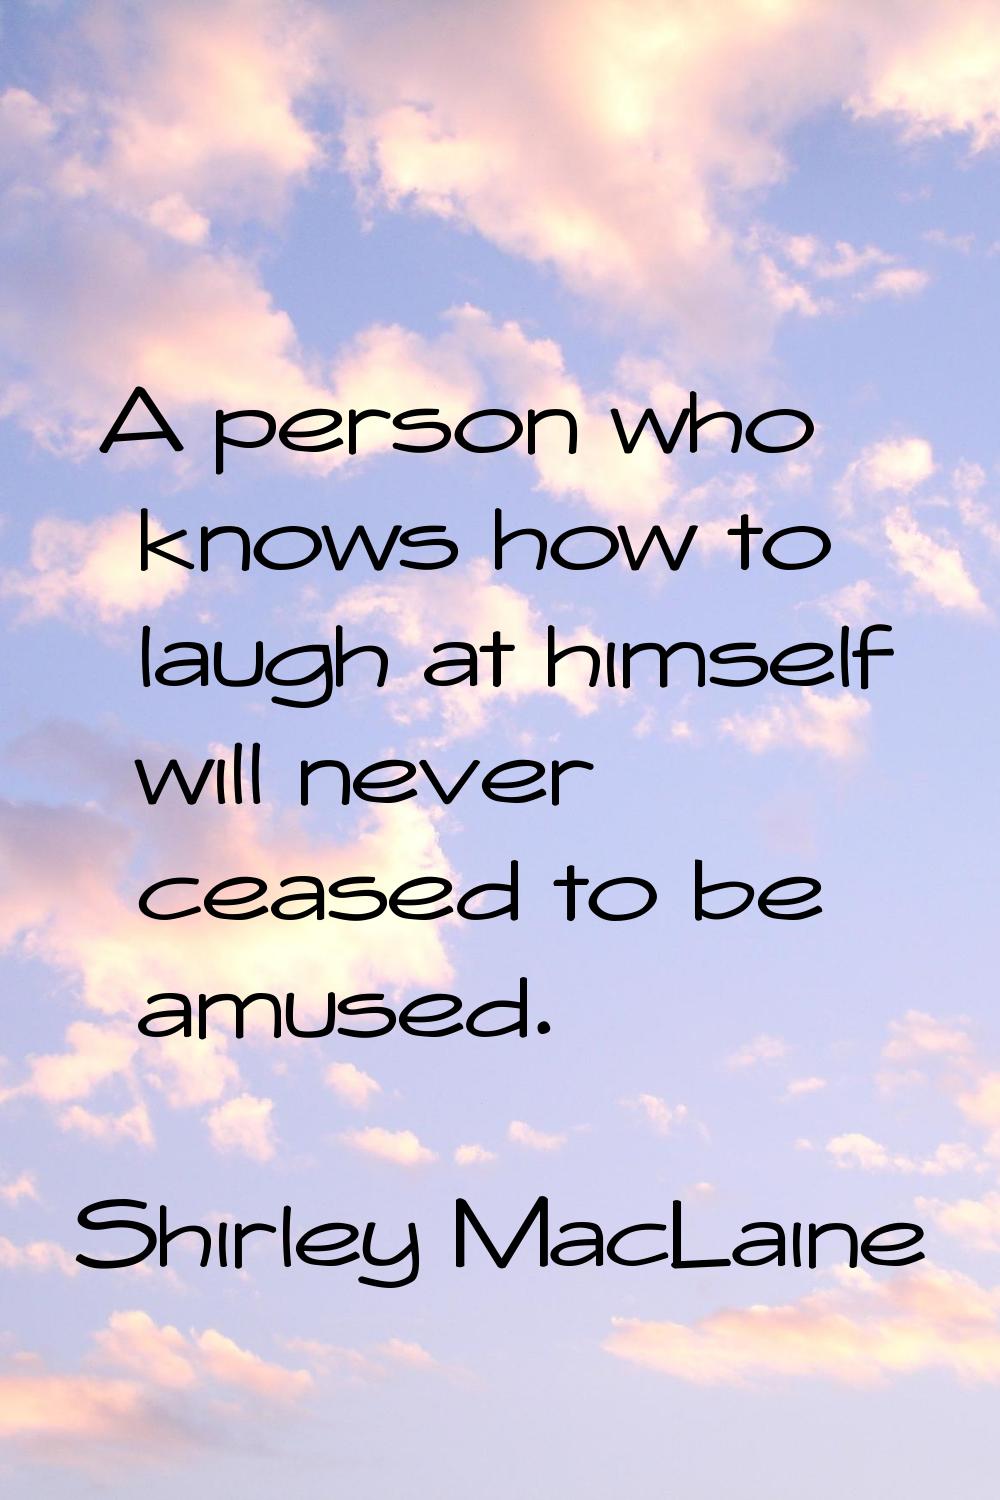 A person who knows how to laugh at himself will never ceased to be amused.